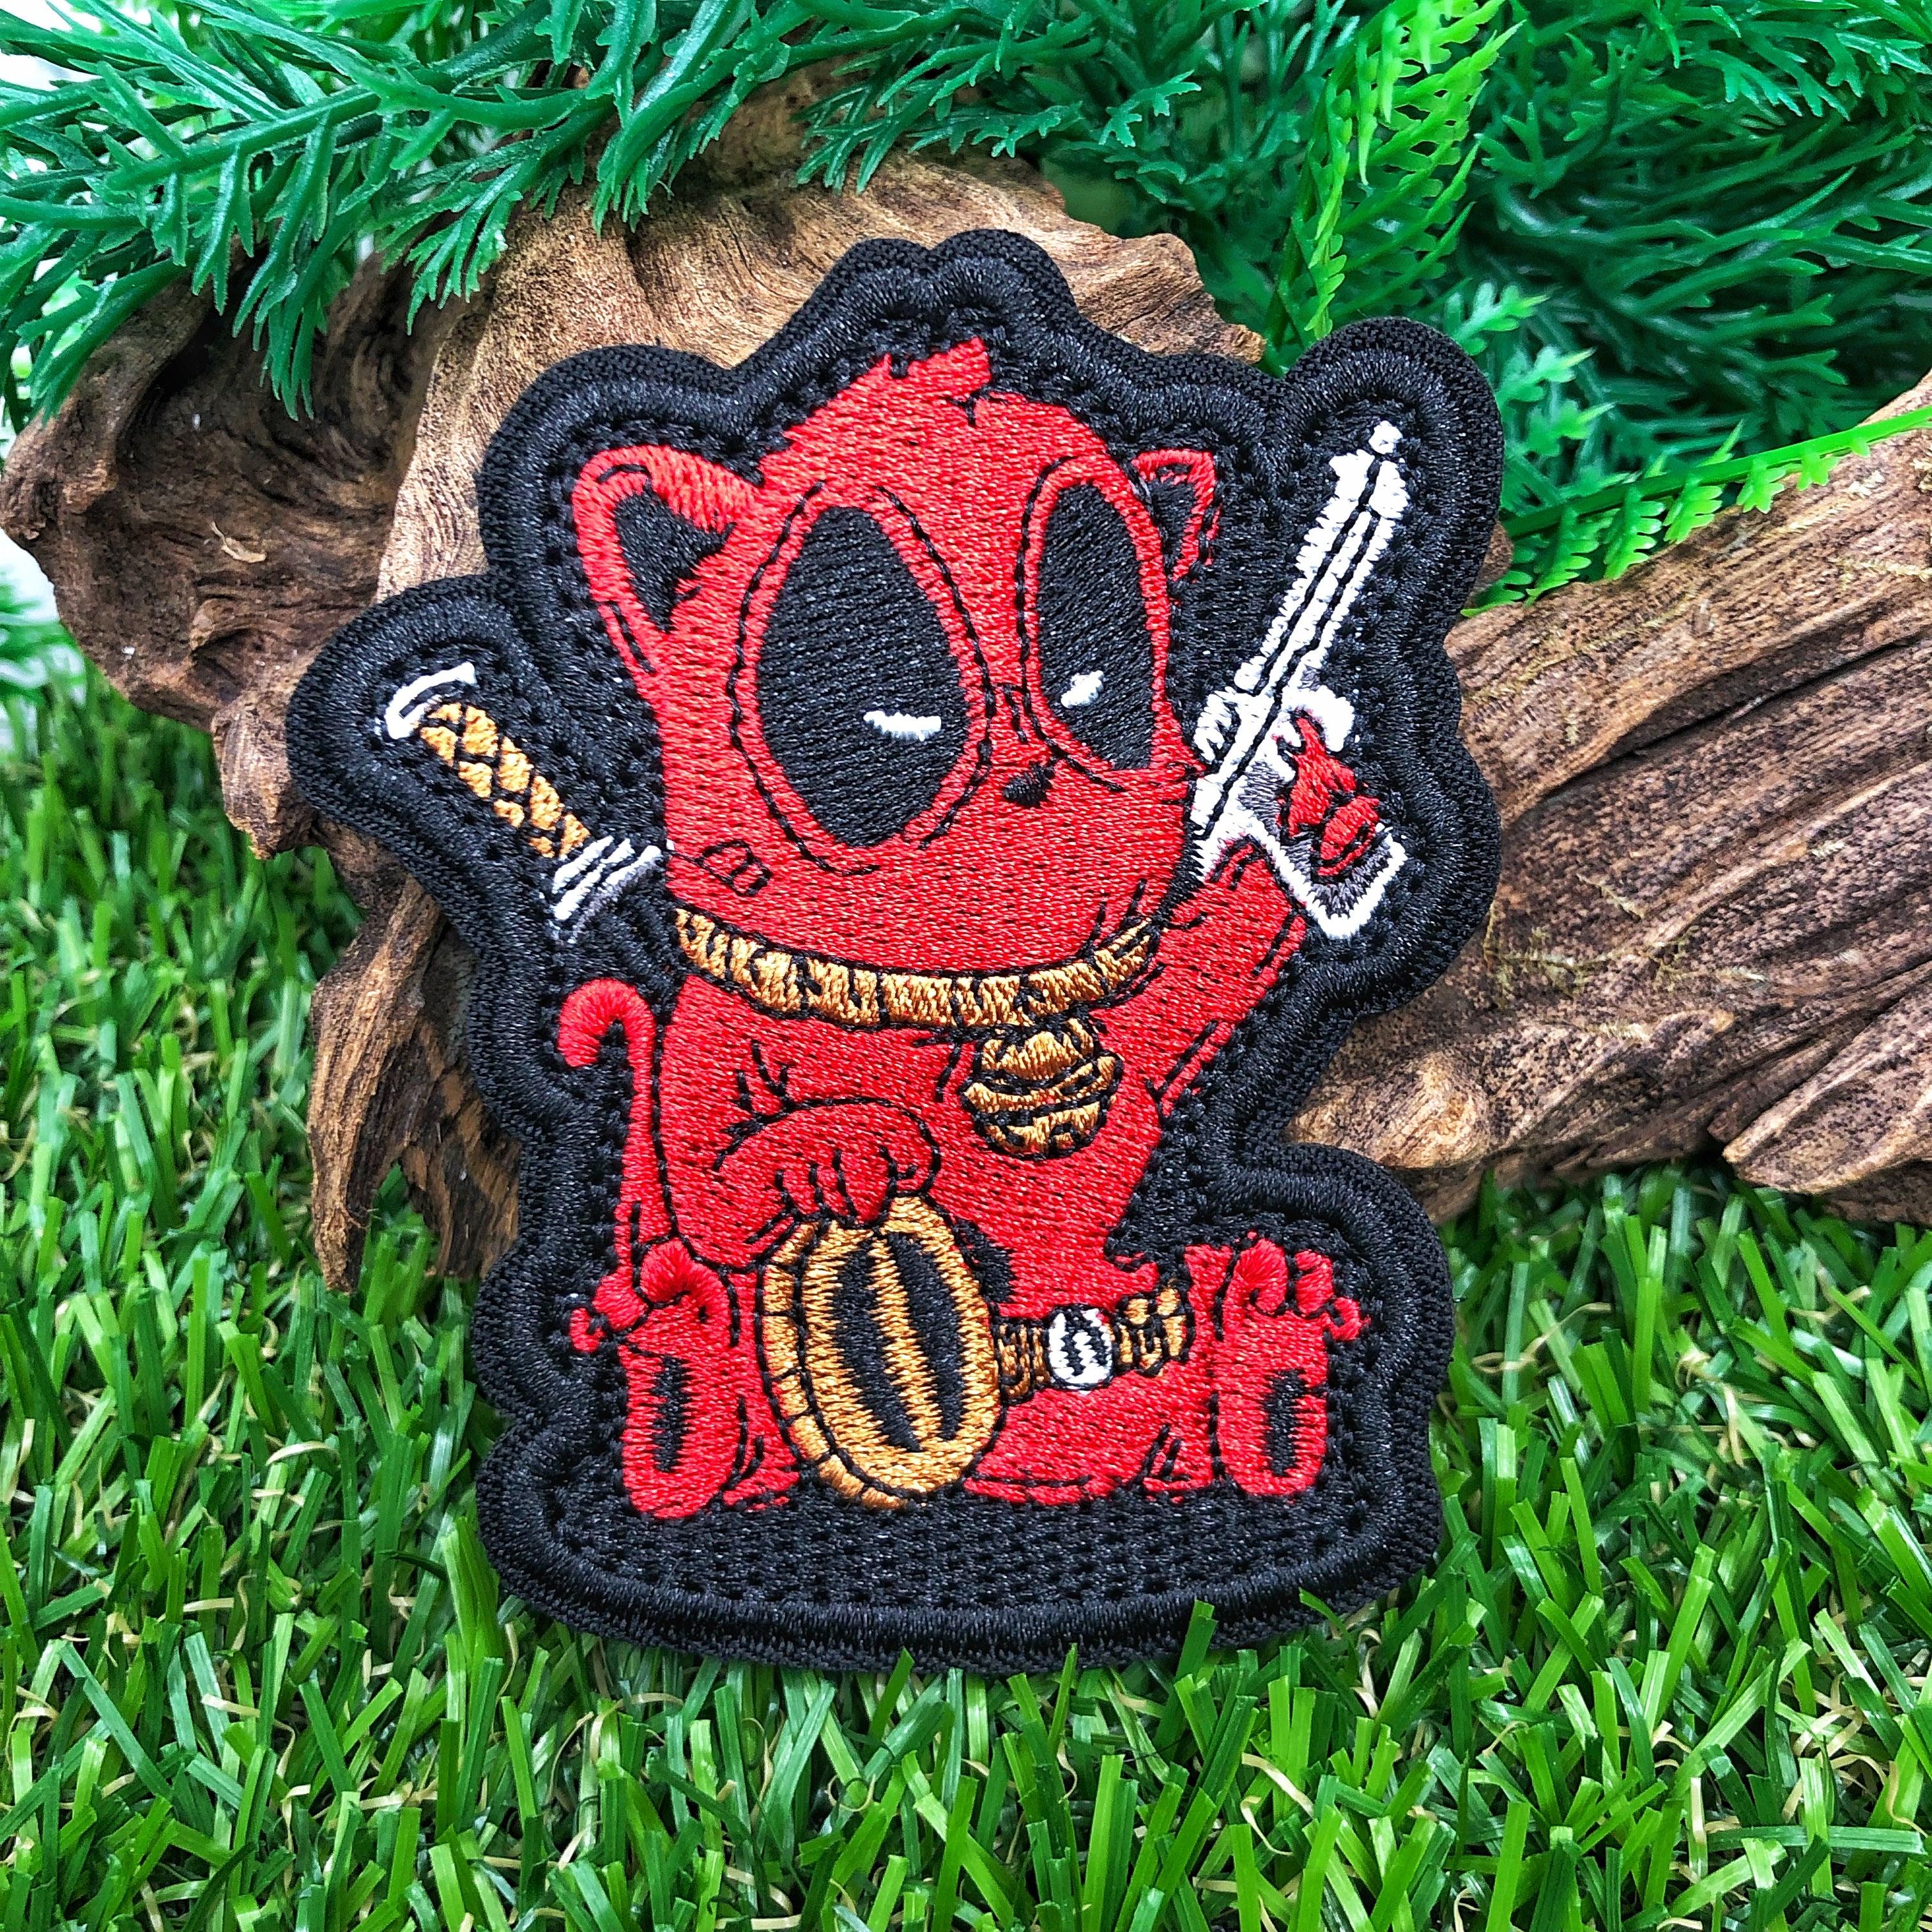 Embrodiery Patch - Kitty Deadpool